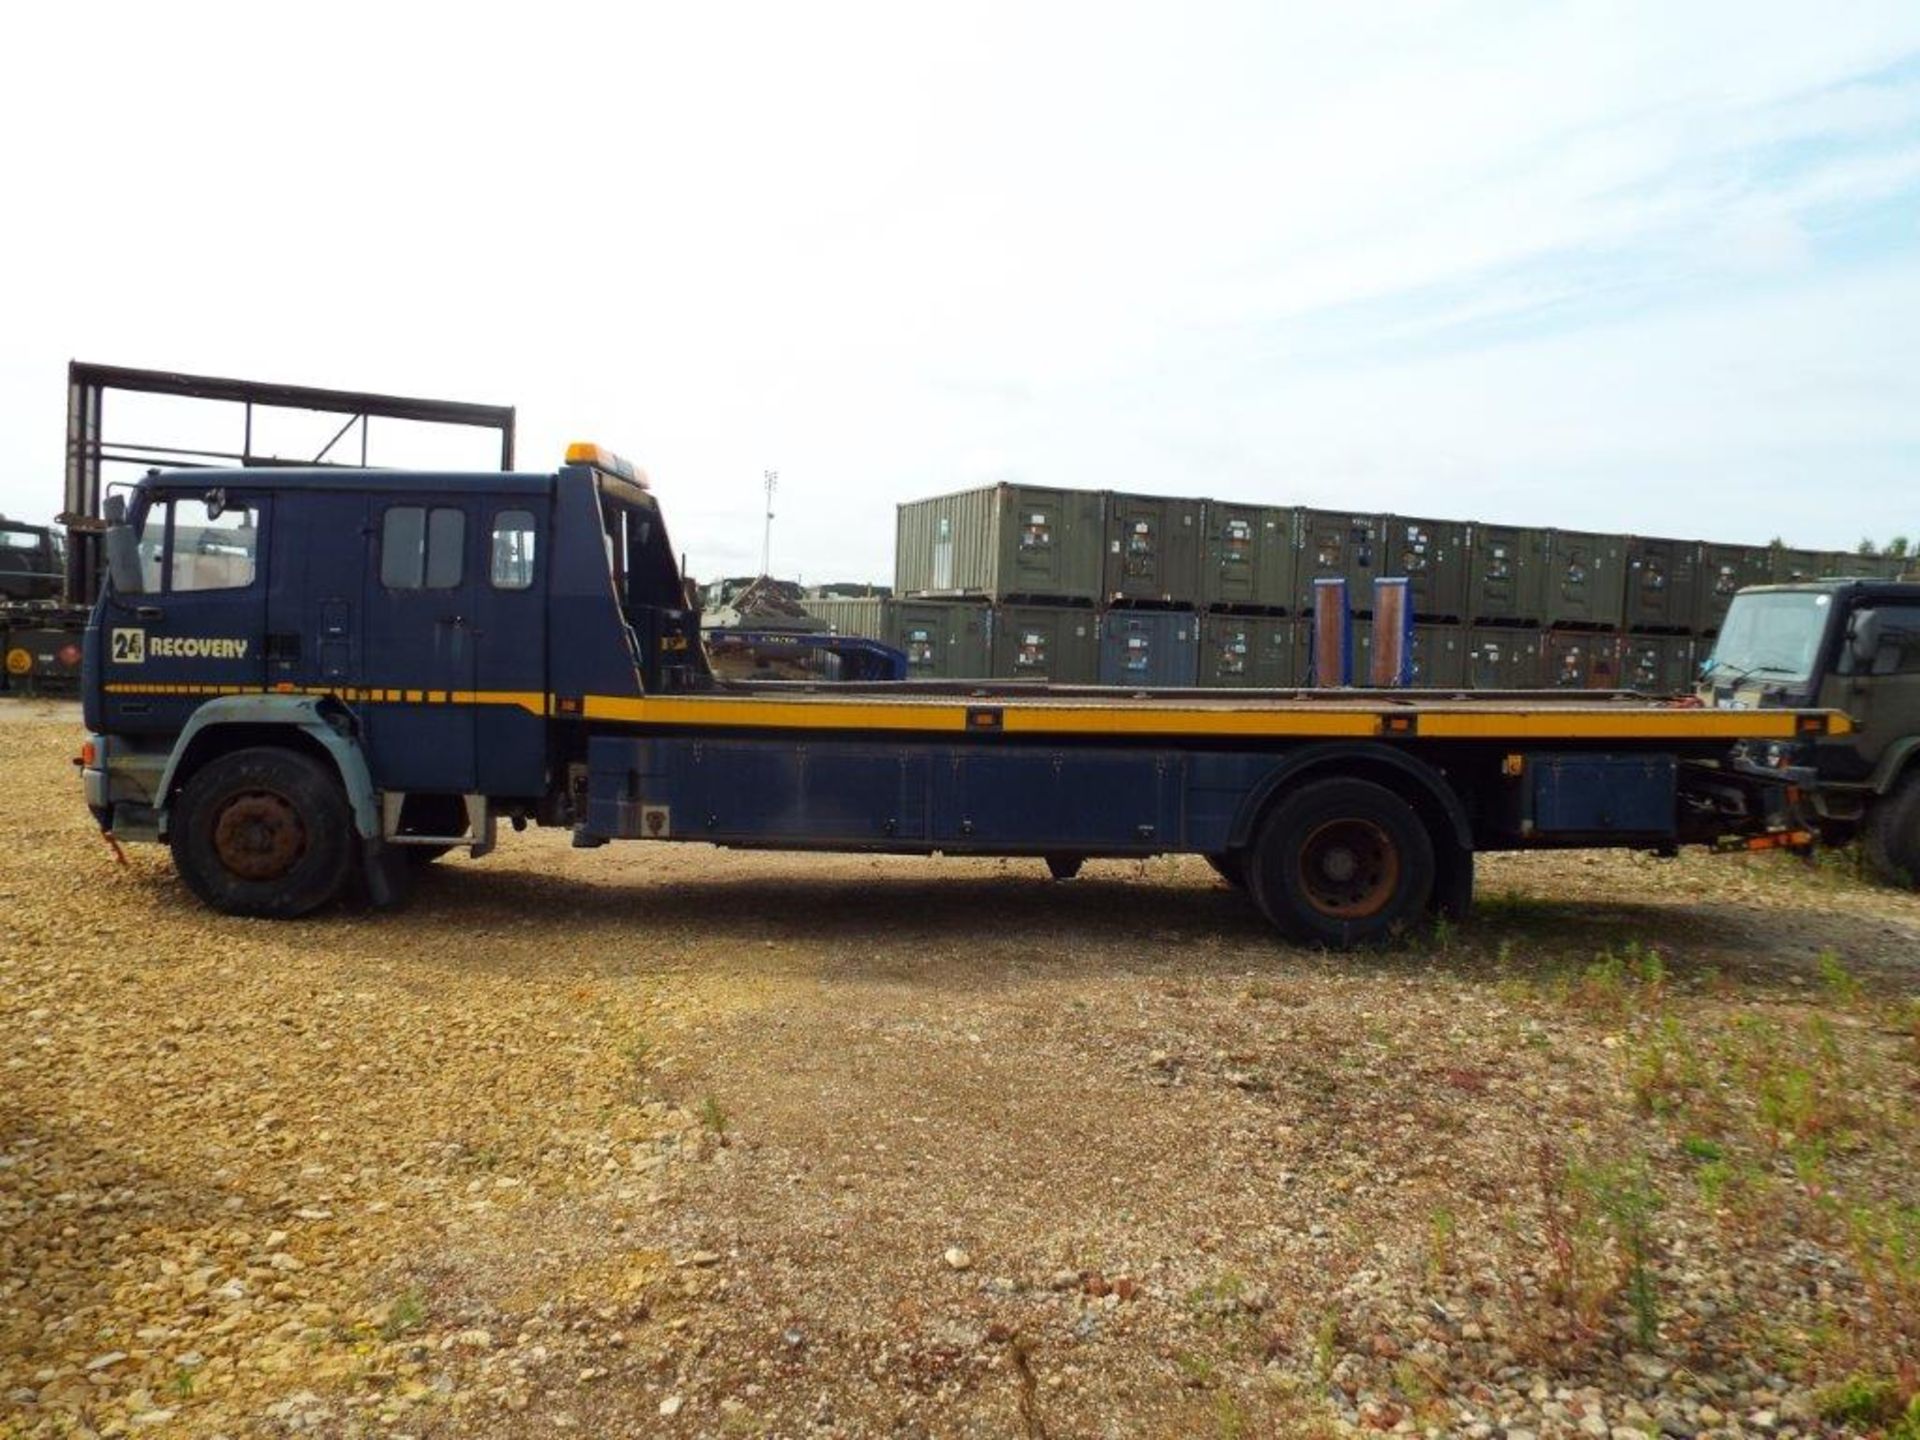 Leyland DAF 55 210 Crew Cab 18T Tilt and Slide Recovery Vehicle with Underlift and 2 x Winches - Image 4 of 32